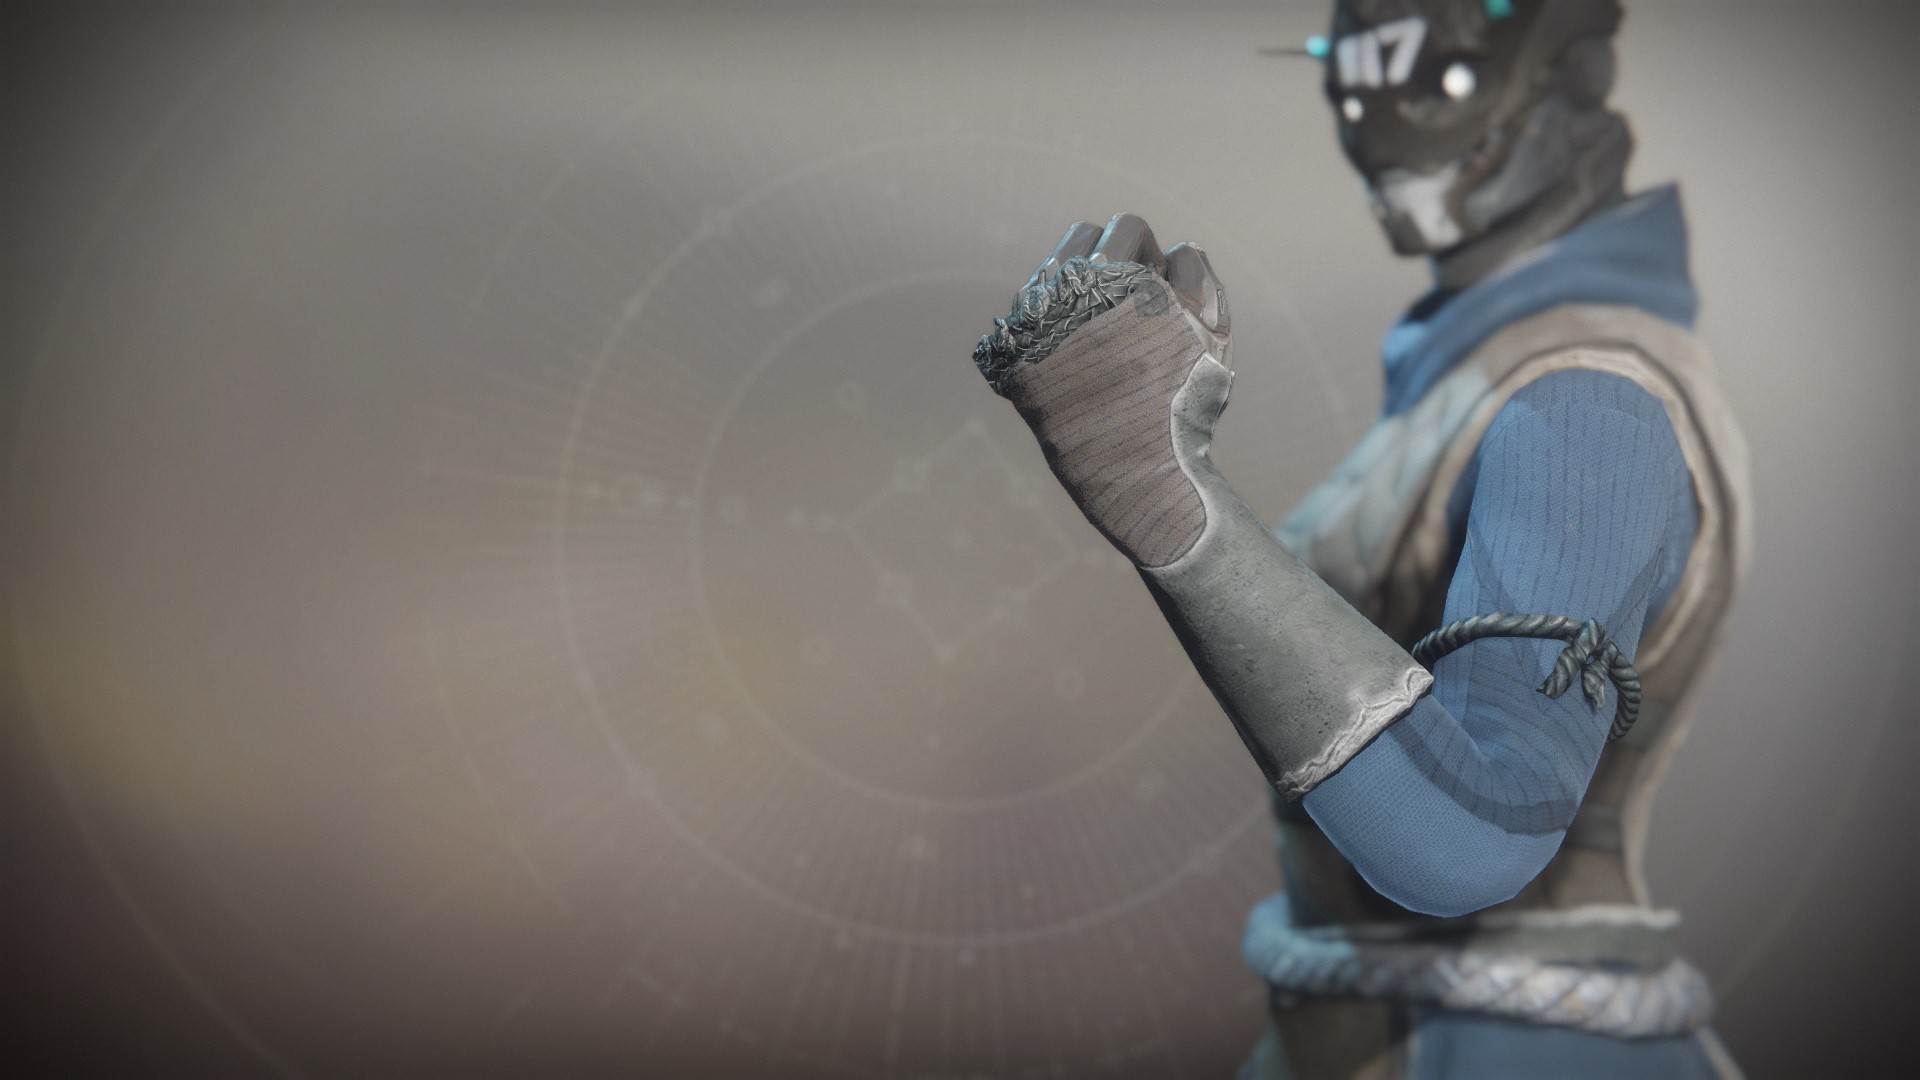 An in-game render of the Aspirant Gloves.